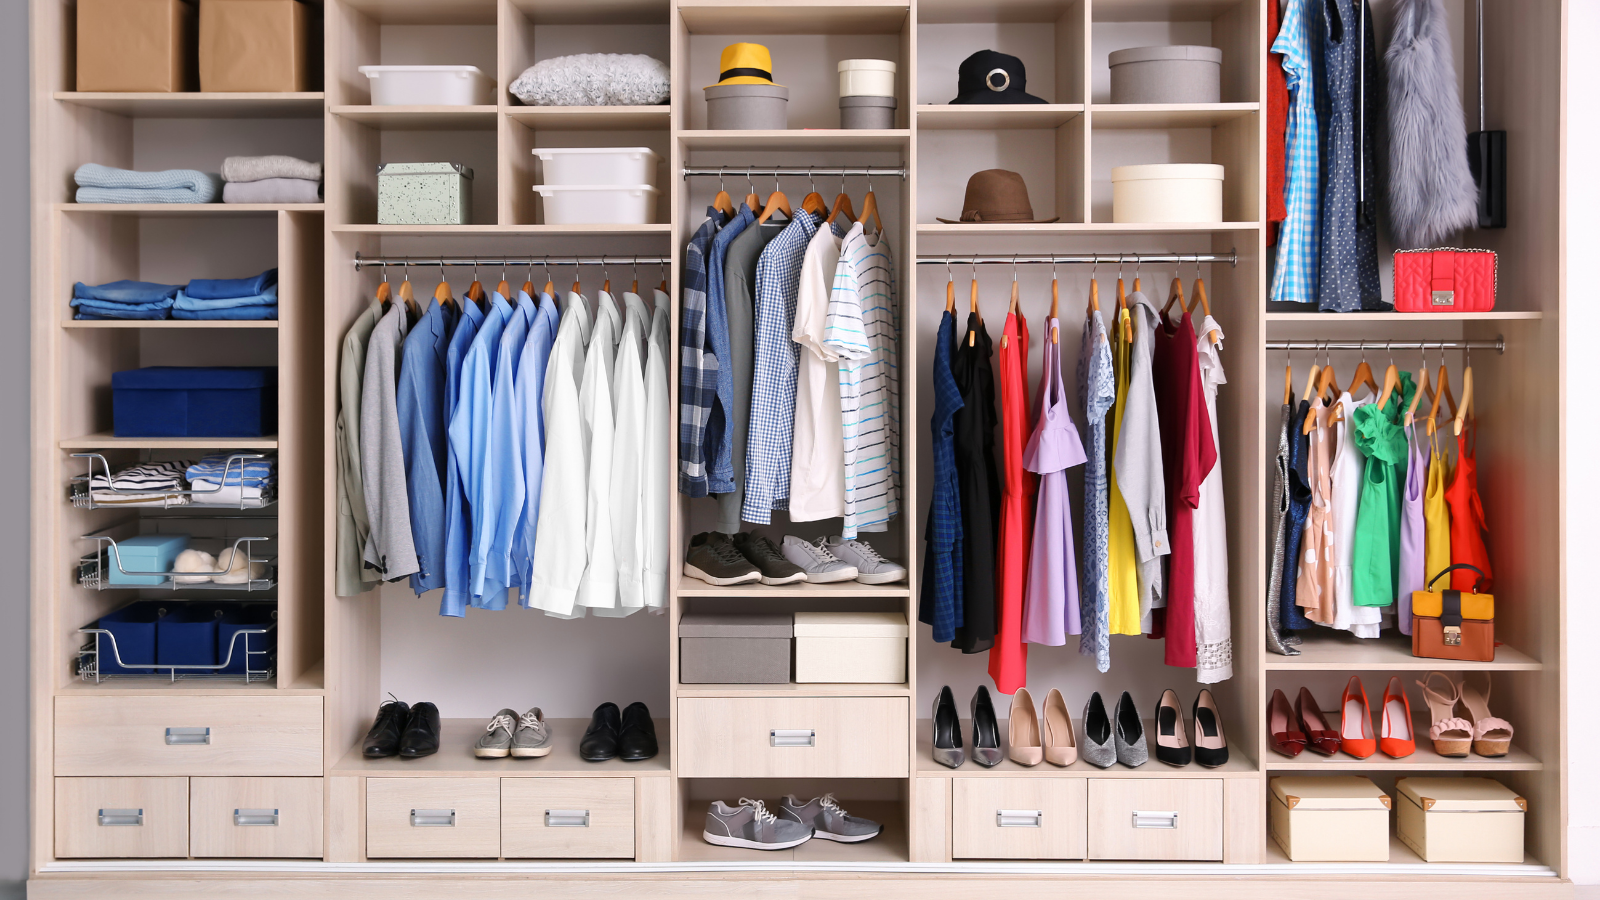 Big and very well organized wardrobe with different clothes